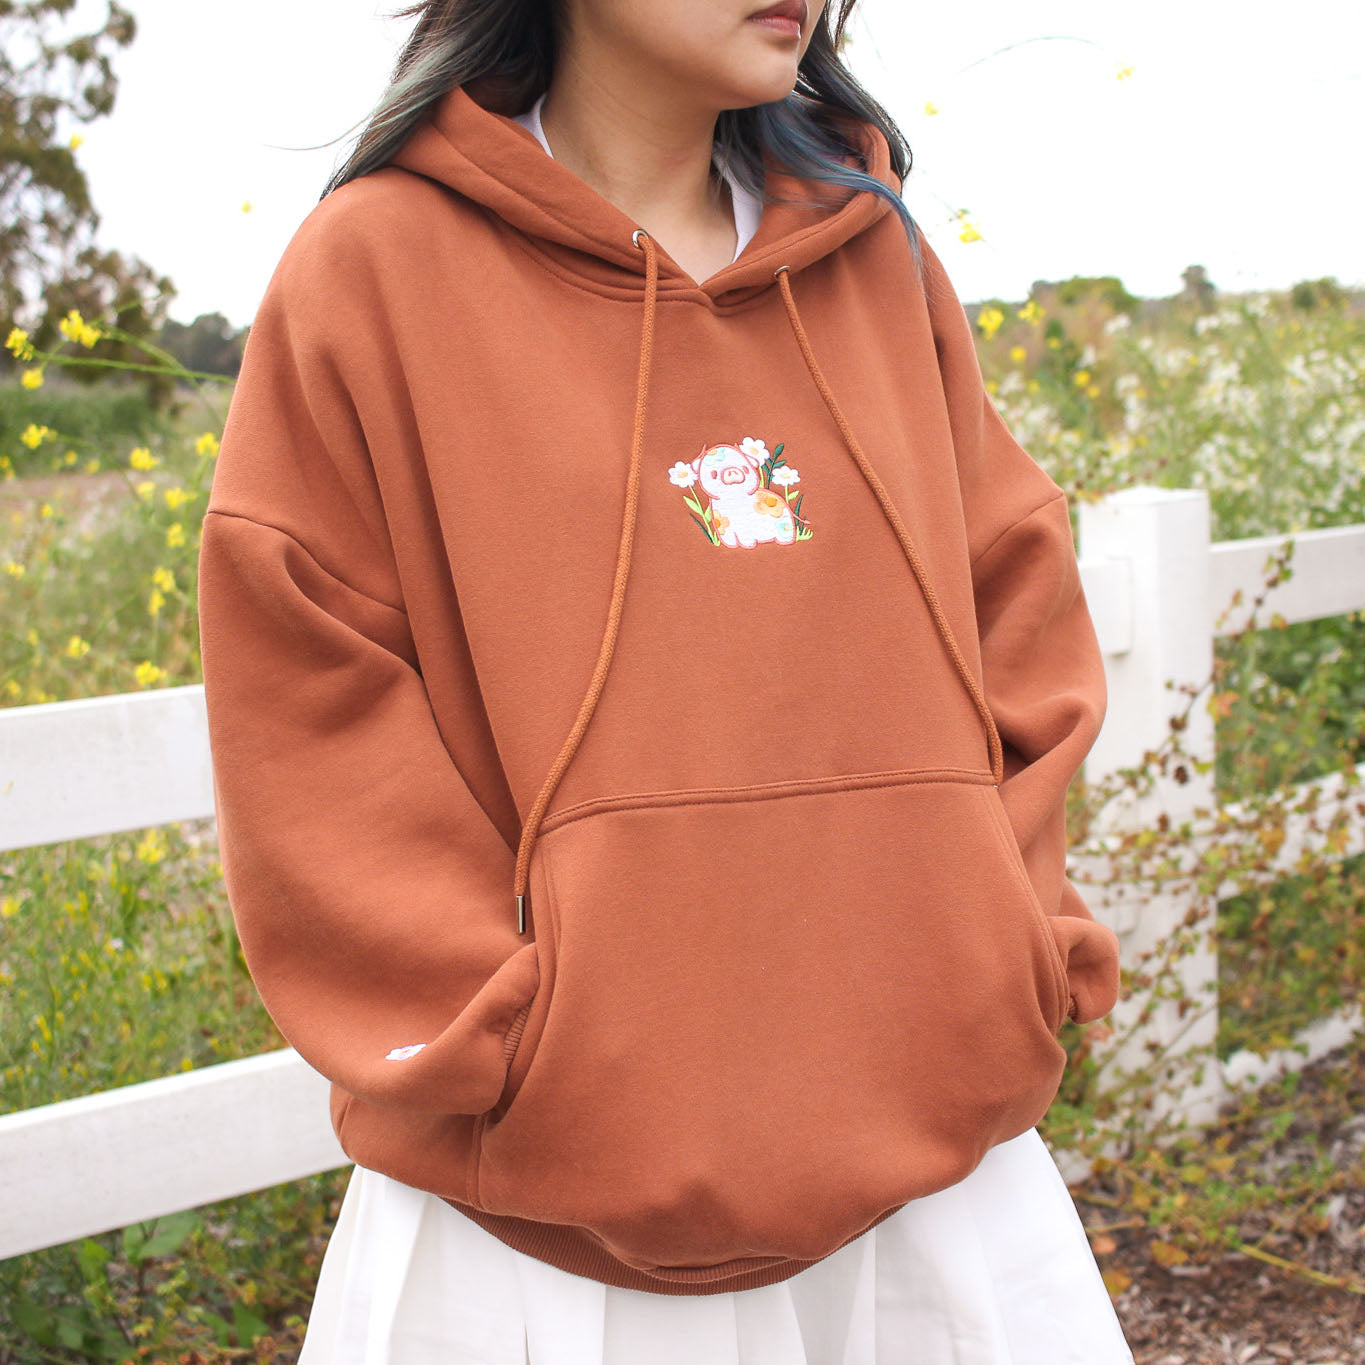 Blossom the Calf - Embroidered Hoodie (Unisex Sizes XS - 2XL)